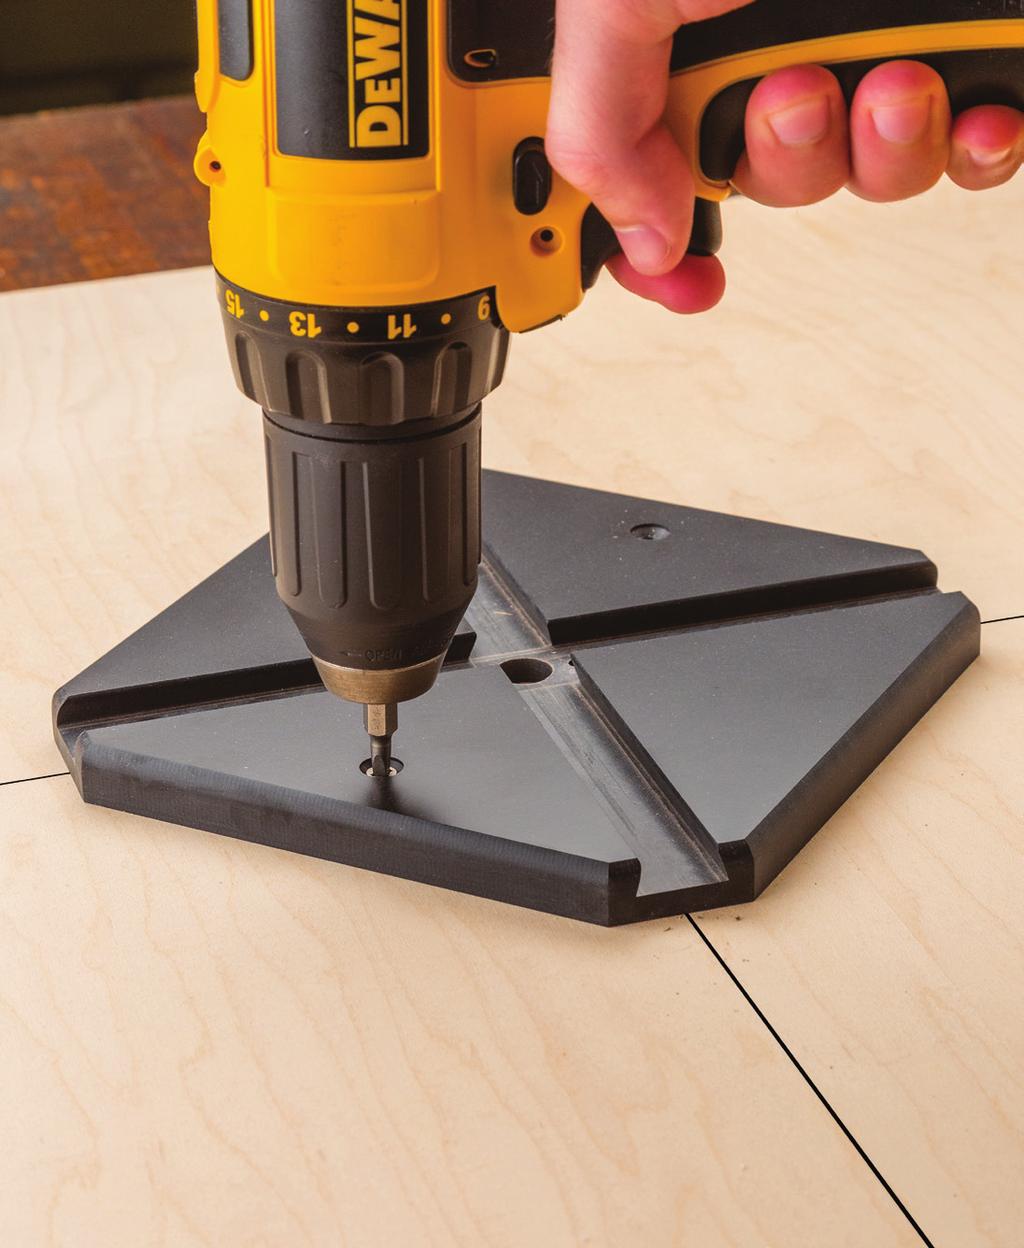 If making through cuts, elevate your workpiece to prevent damage to the surface underneath.